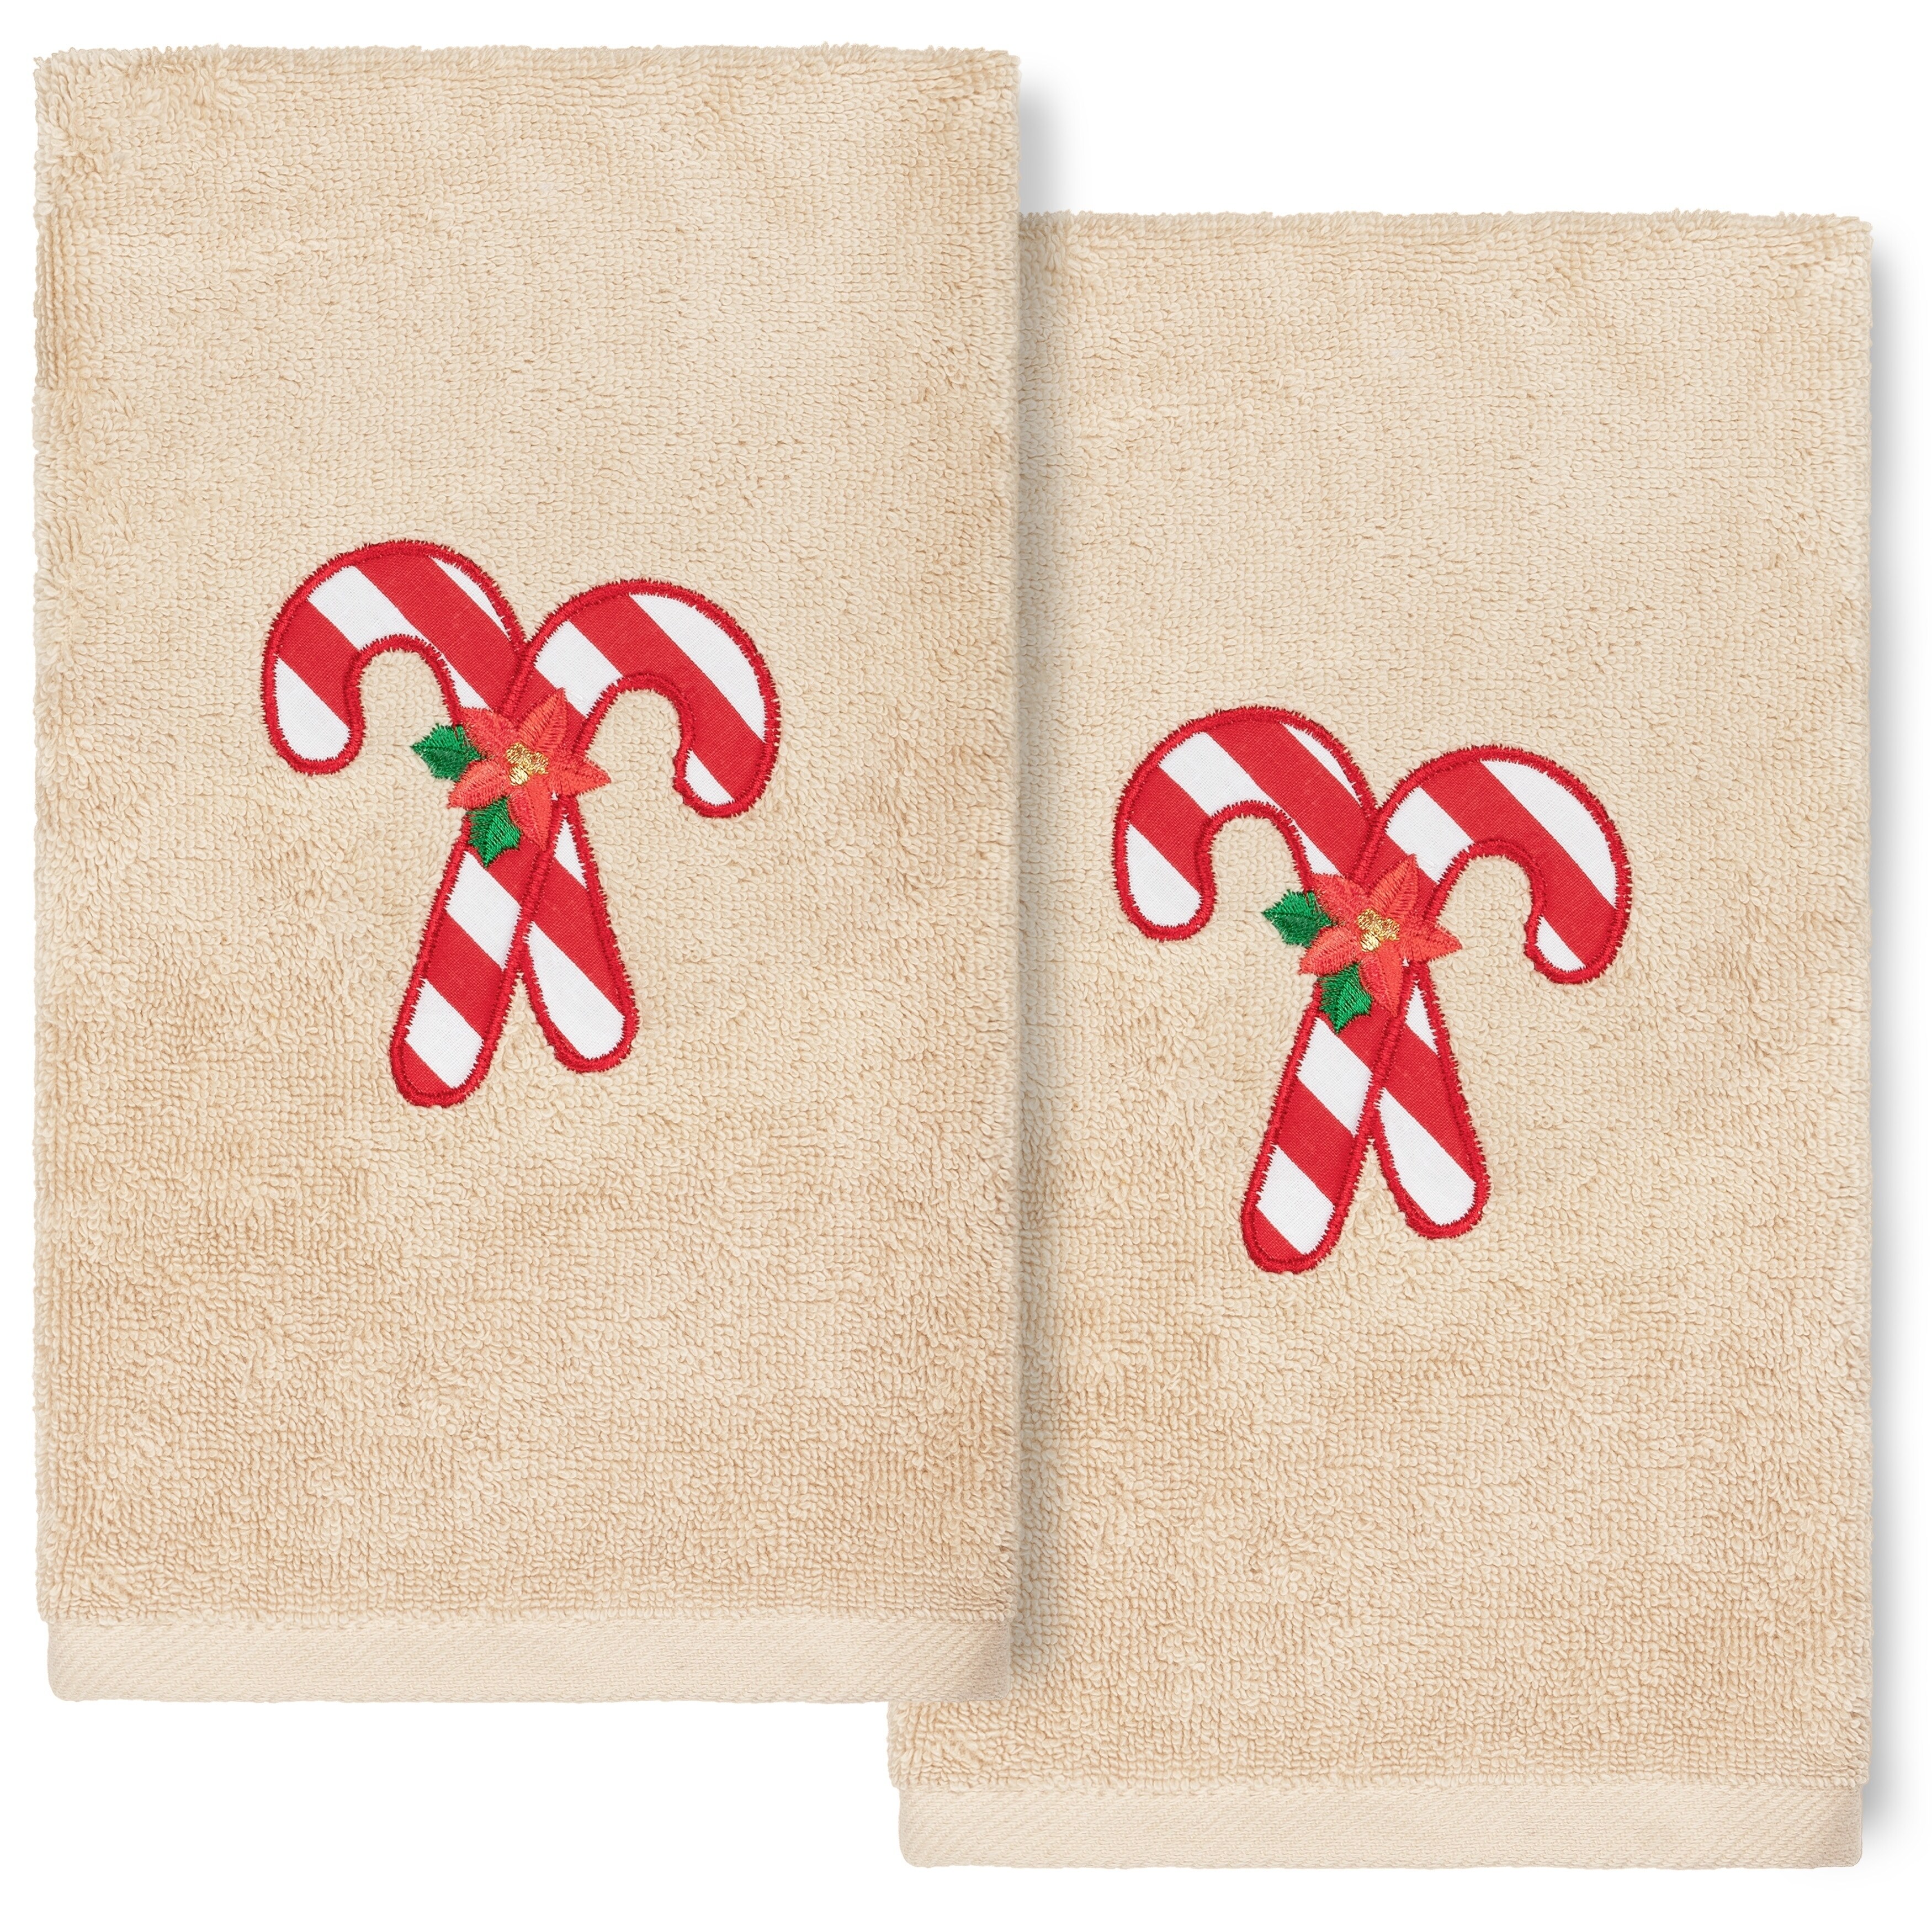 Authentic Hotel and Spa Christmas Bells Embroidered White Turkish Cotton Hand Towels (Set of 2)